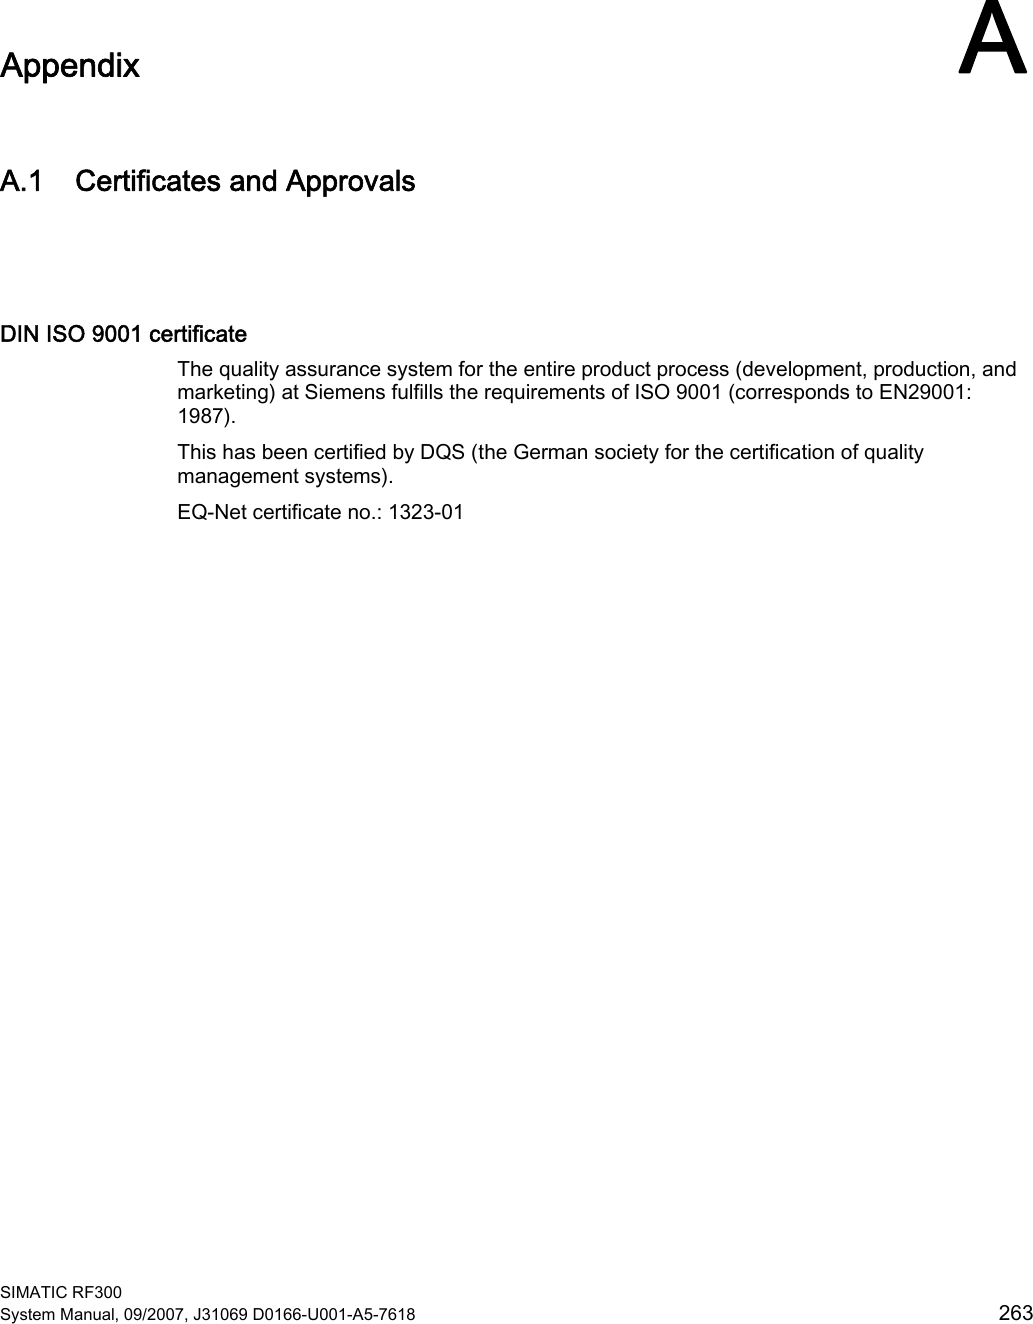  SIMATIC RF300 System Manual, 09/2007, J31069 D0166-U001-A5-7618  263 Appendix  AA.1 Certificates and Approvals  DIN ISO 9001 certificate The quality assurance system for the entire product process (development, production, and marketing) at Siemens fulfills the requirements of ISO 9001 (corresponds to EN29001: 1987). This has been certified by DQS (the German society for the certification of quality management systems). EQ-Net certificate no.: 1323-01 